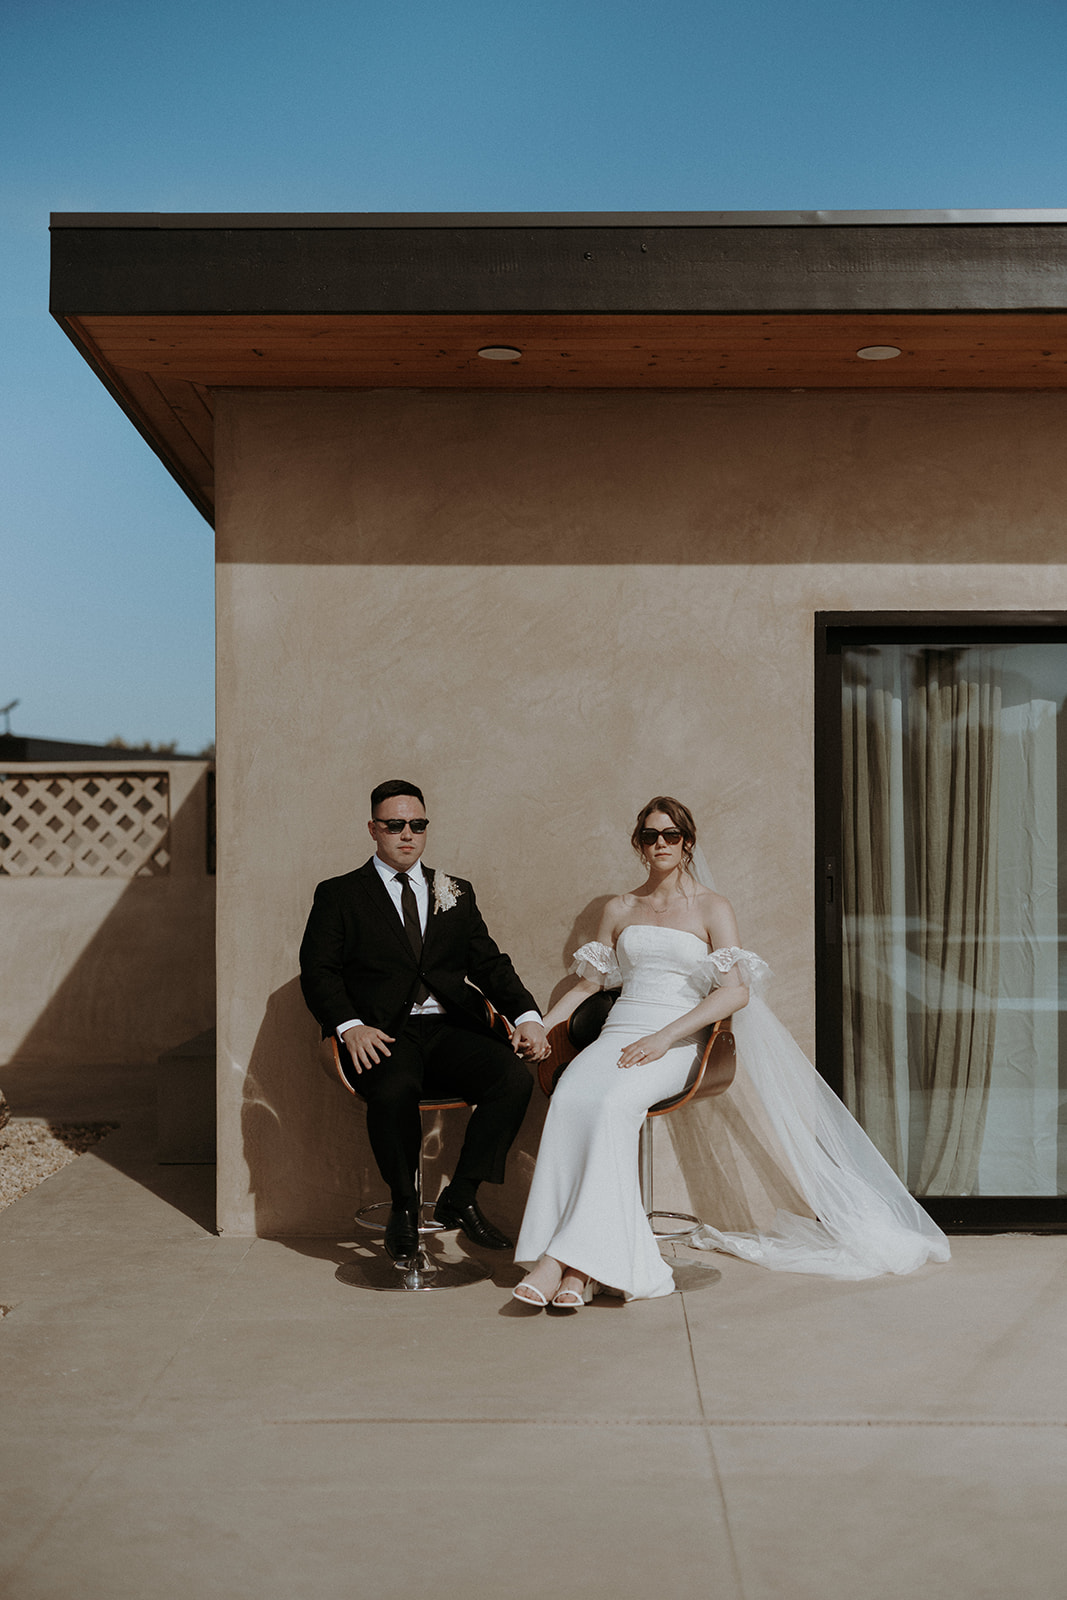 A wedding couple outside a modern boho airbnb sitting on chairs and wearing sunglasses.